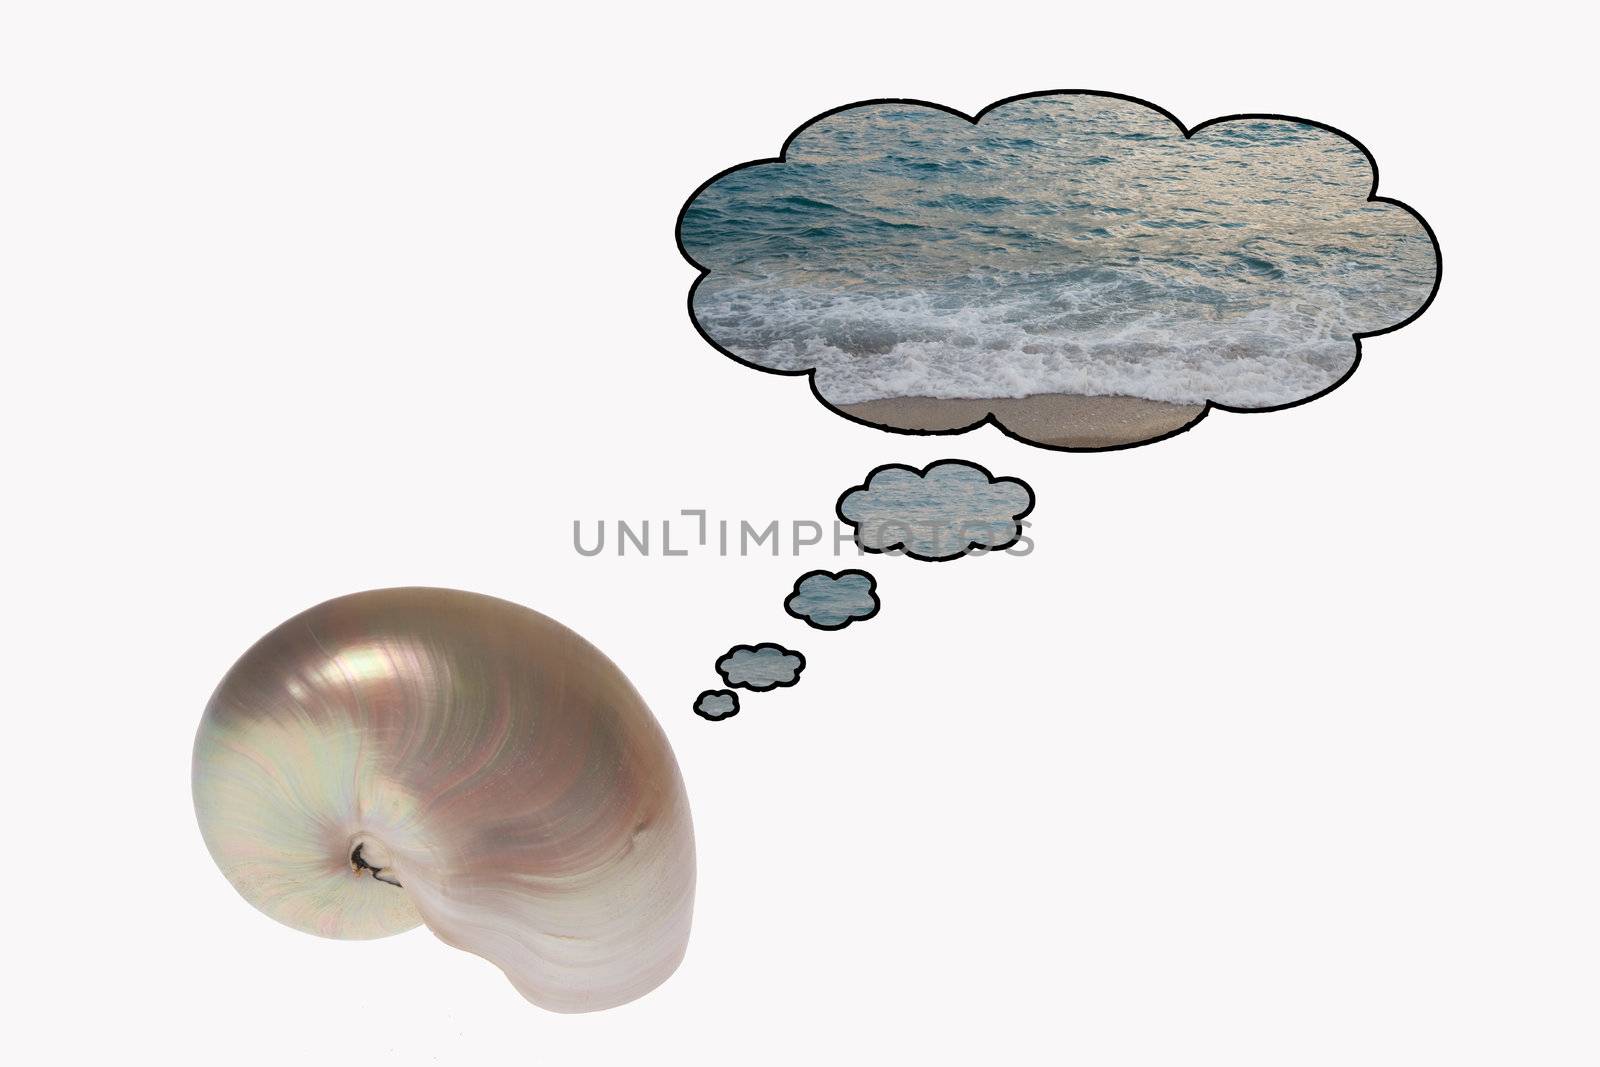 A homesick and dreaming nautilus: An isolate picture of a  winkle with thought bubbles illustrating dreams about the sea.